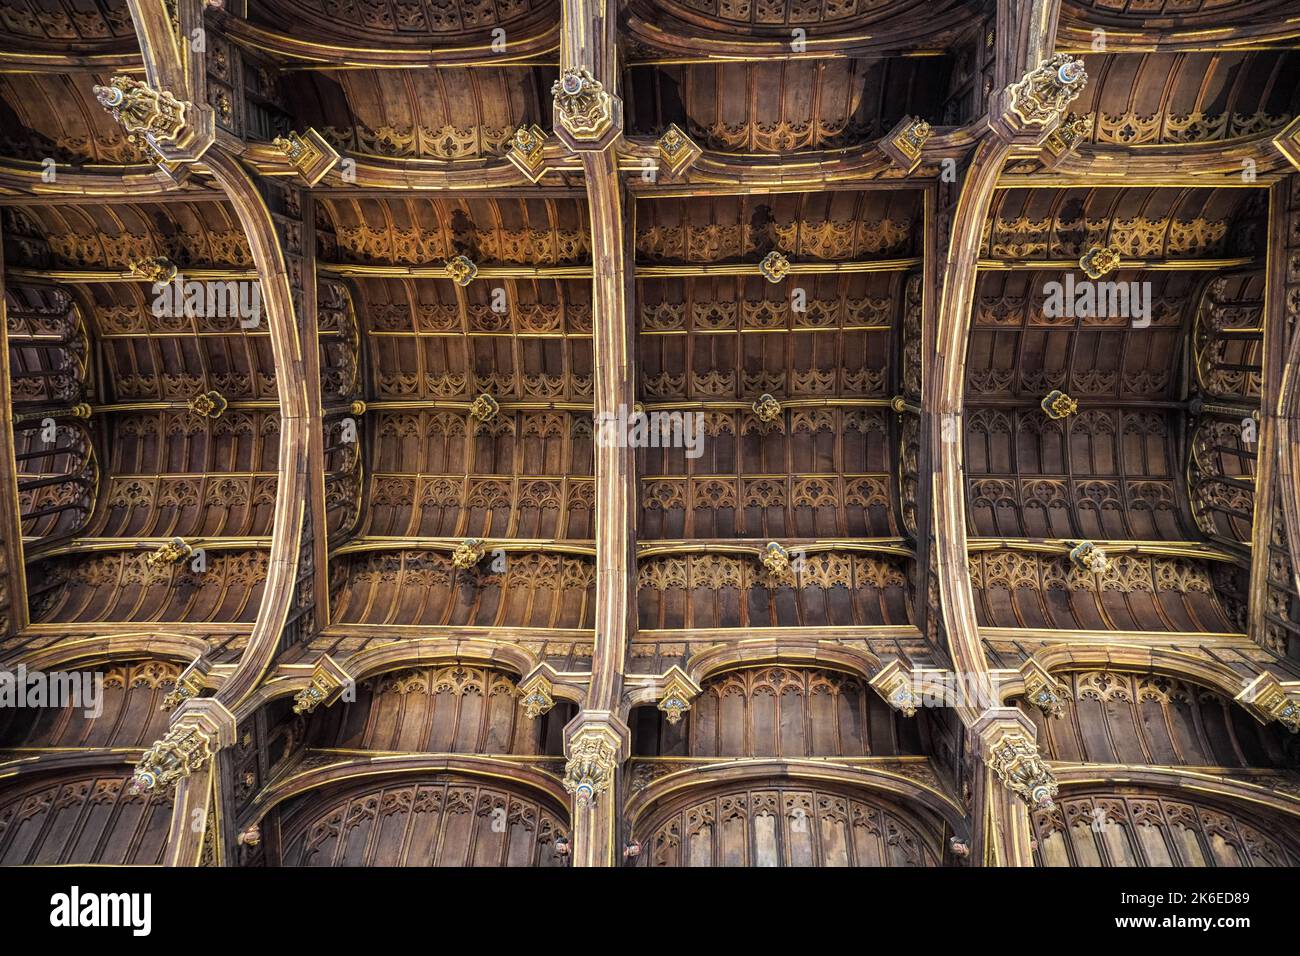 The hammerbeam roof of the Great Hall in Hampton Court Palace, Richmond upon Thames, London, England United Kingdom UK Stock Photo